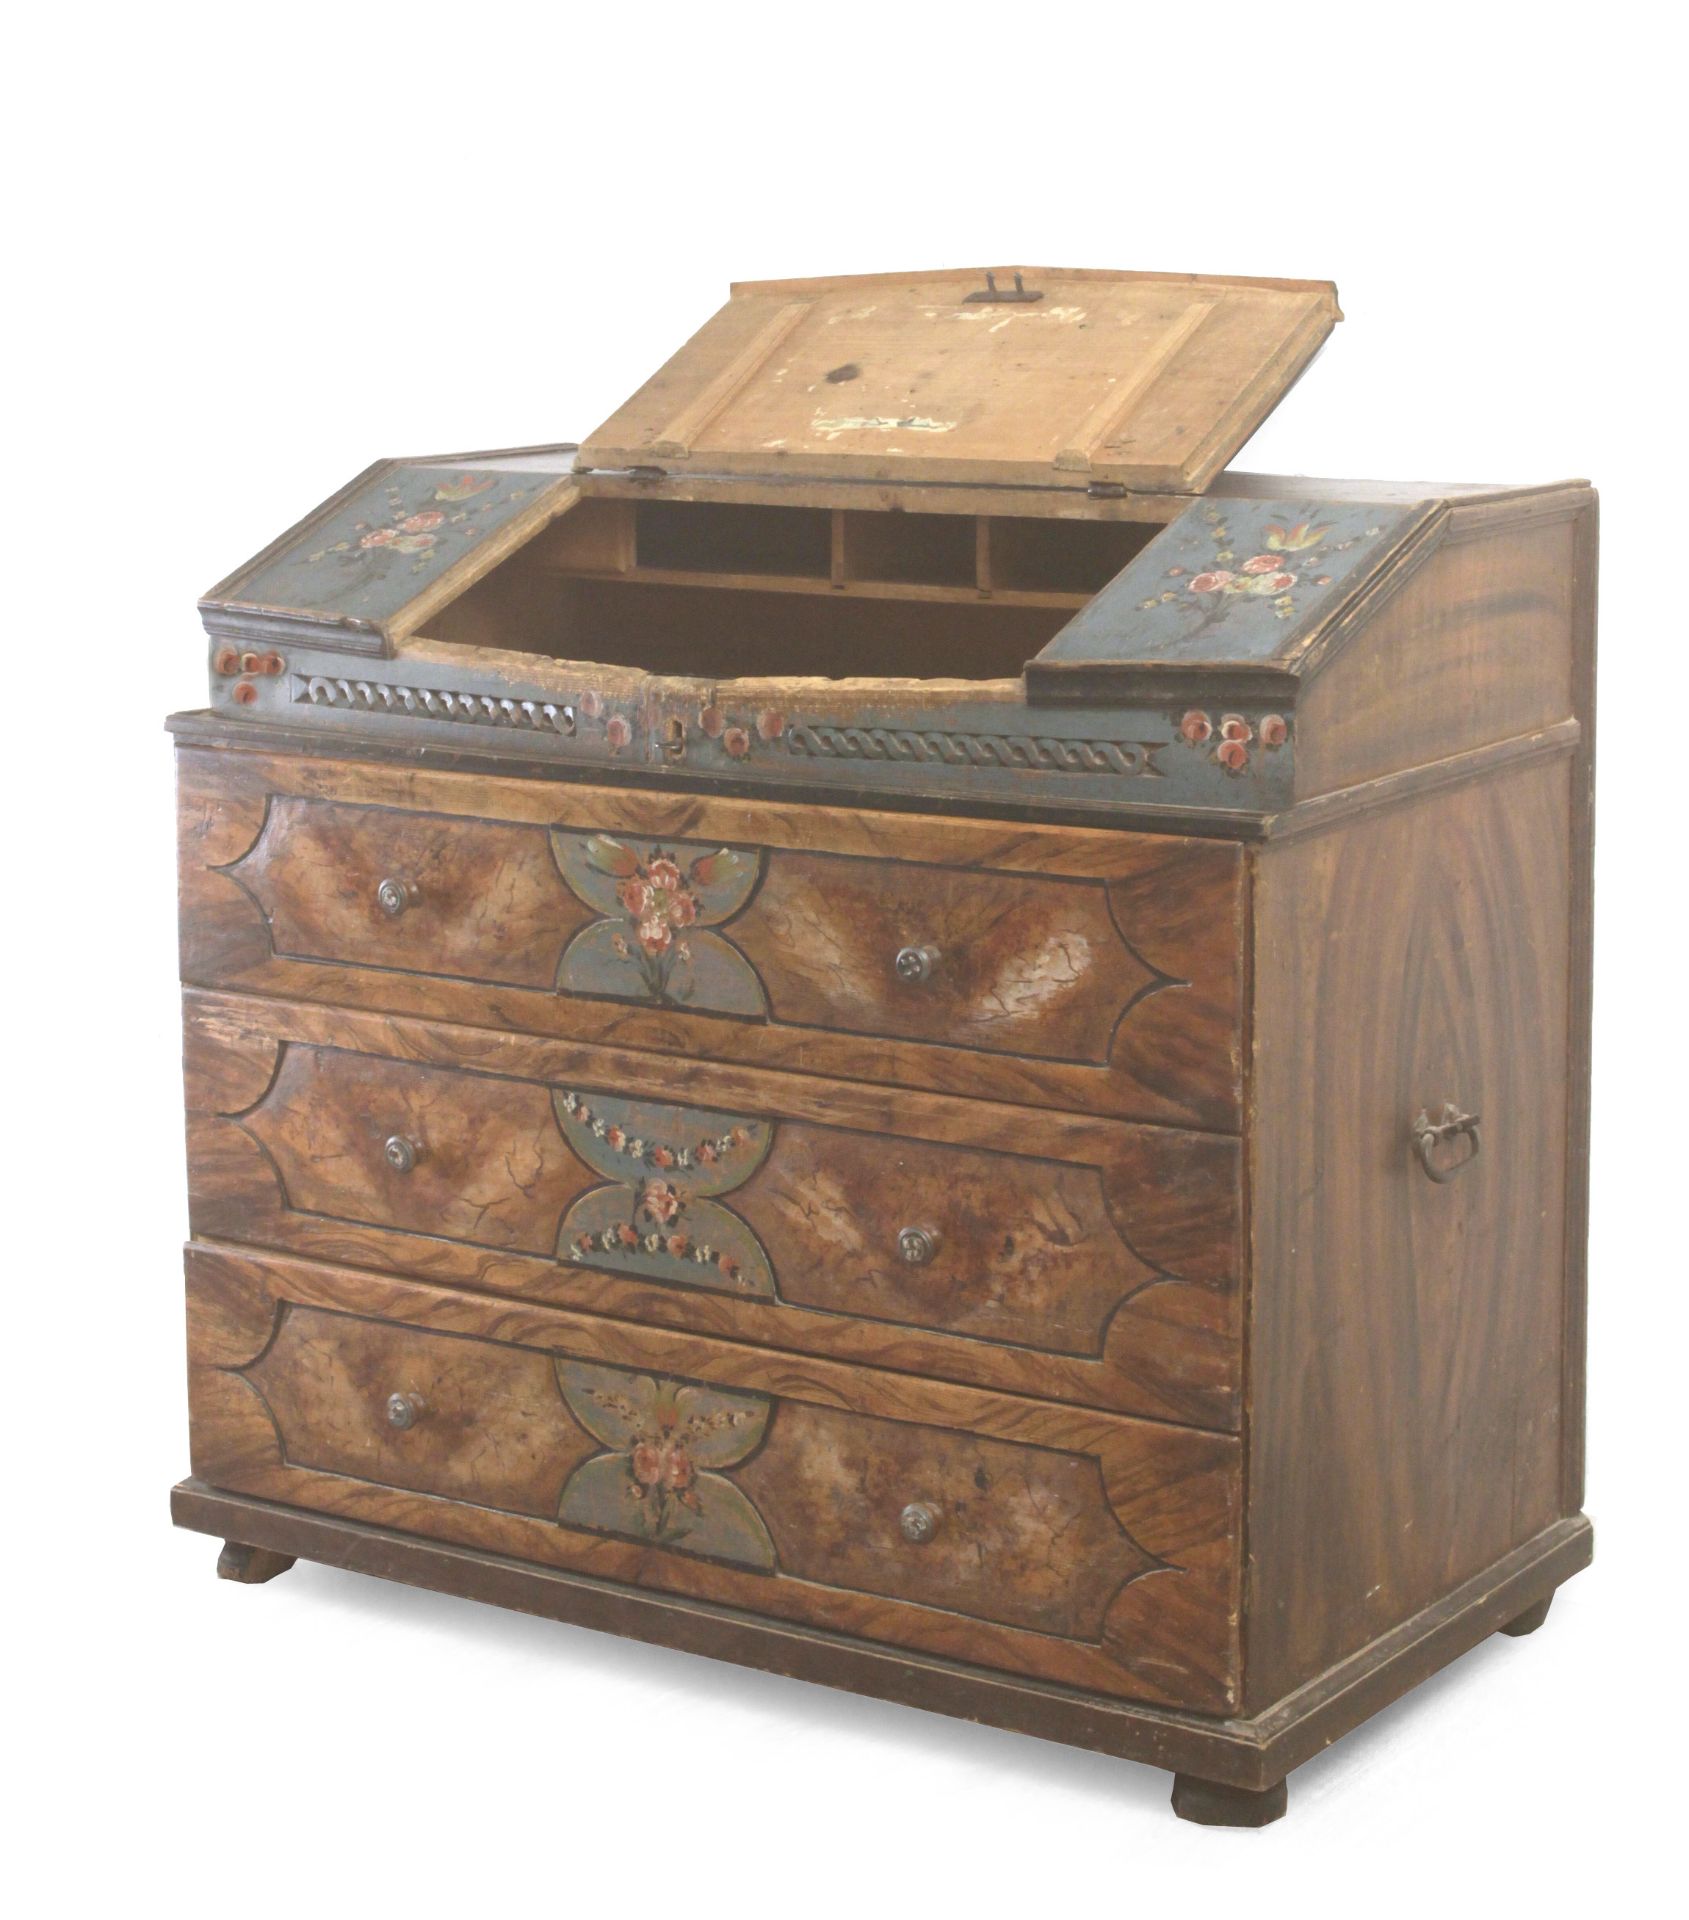 A late 18th century carved and polychromed pine sacristy chest of drawers